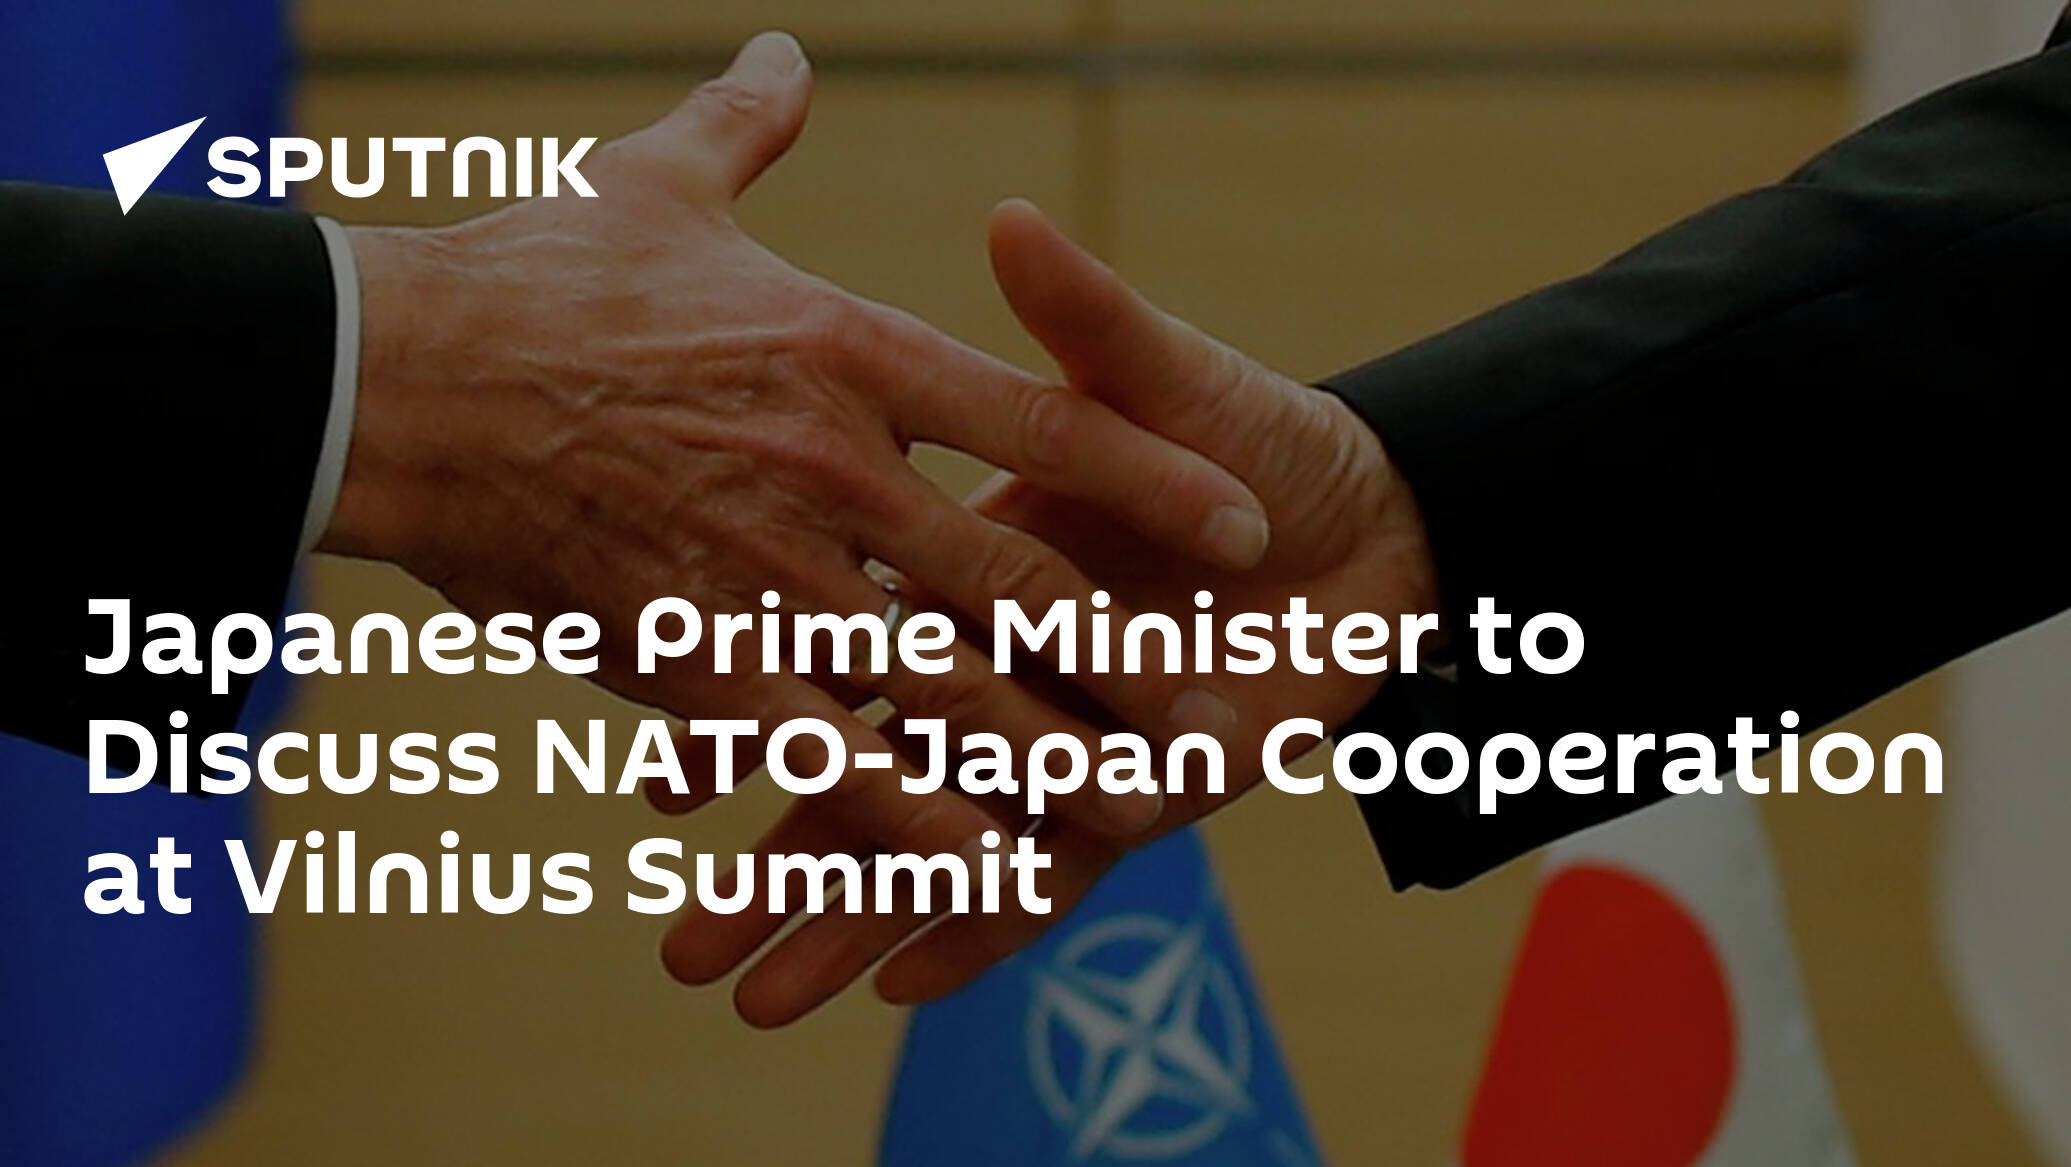 Japanese Prime Minister to Discuss NATO-Japan Cooperation at Vilnius Summit